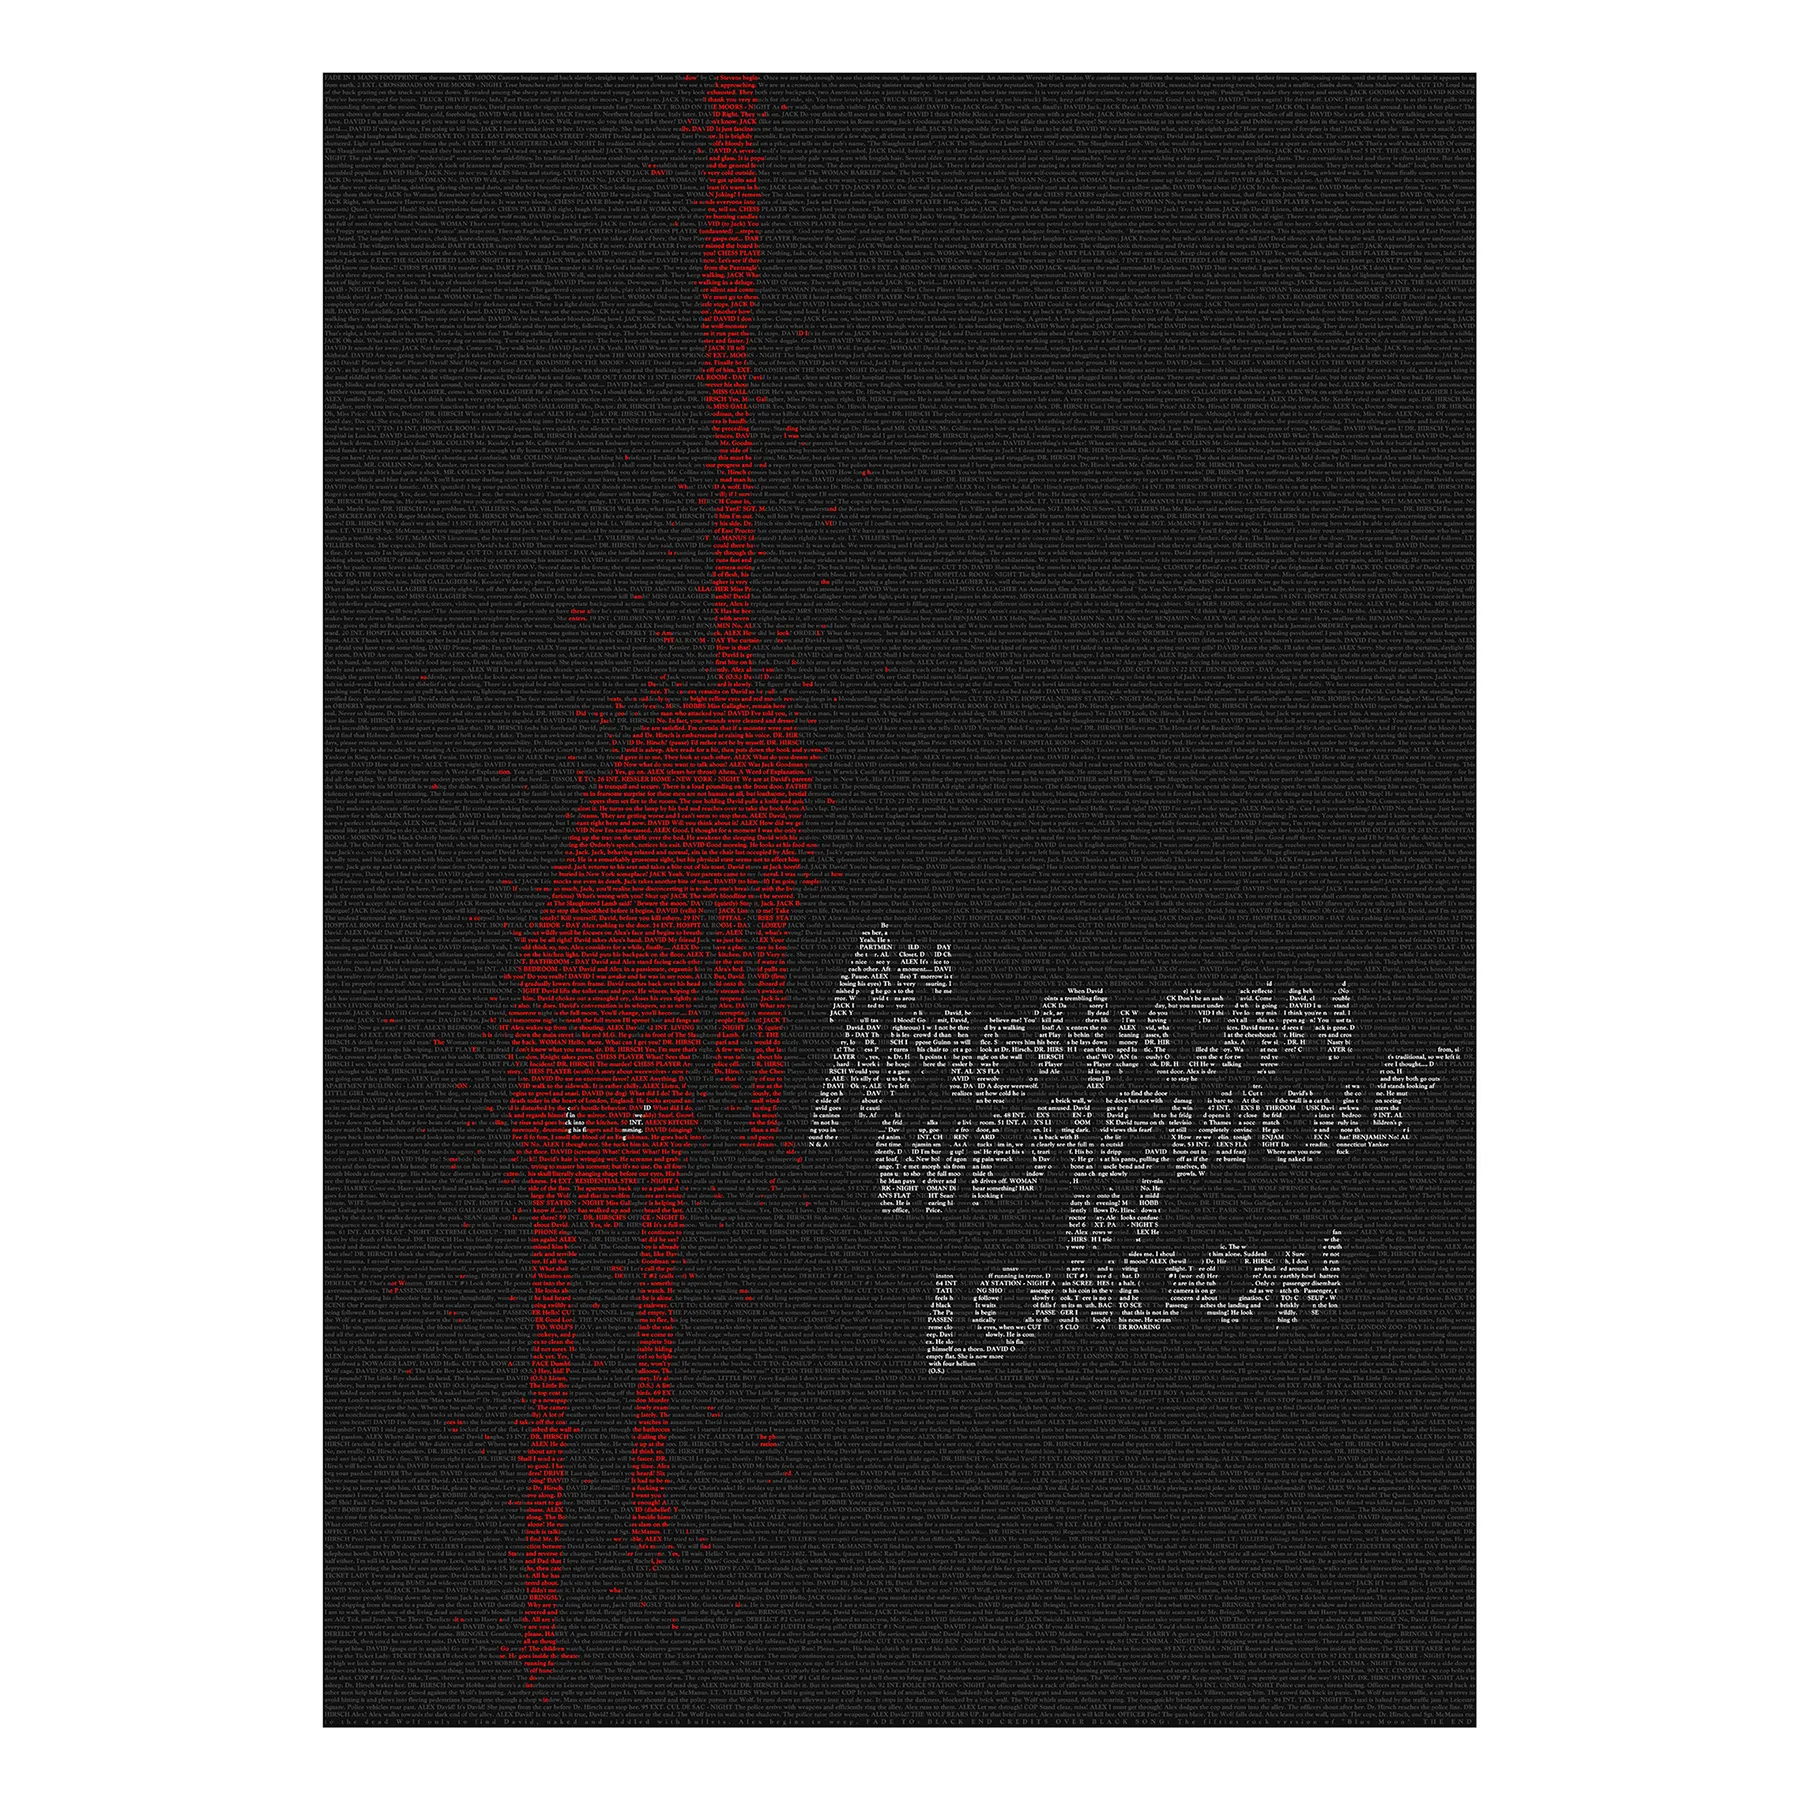 An American Werewolf In London movie poster, created from the script